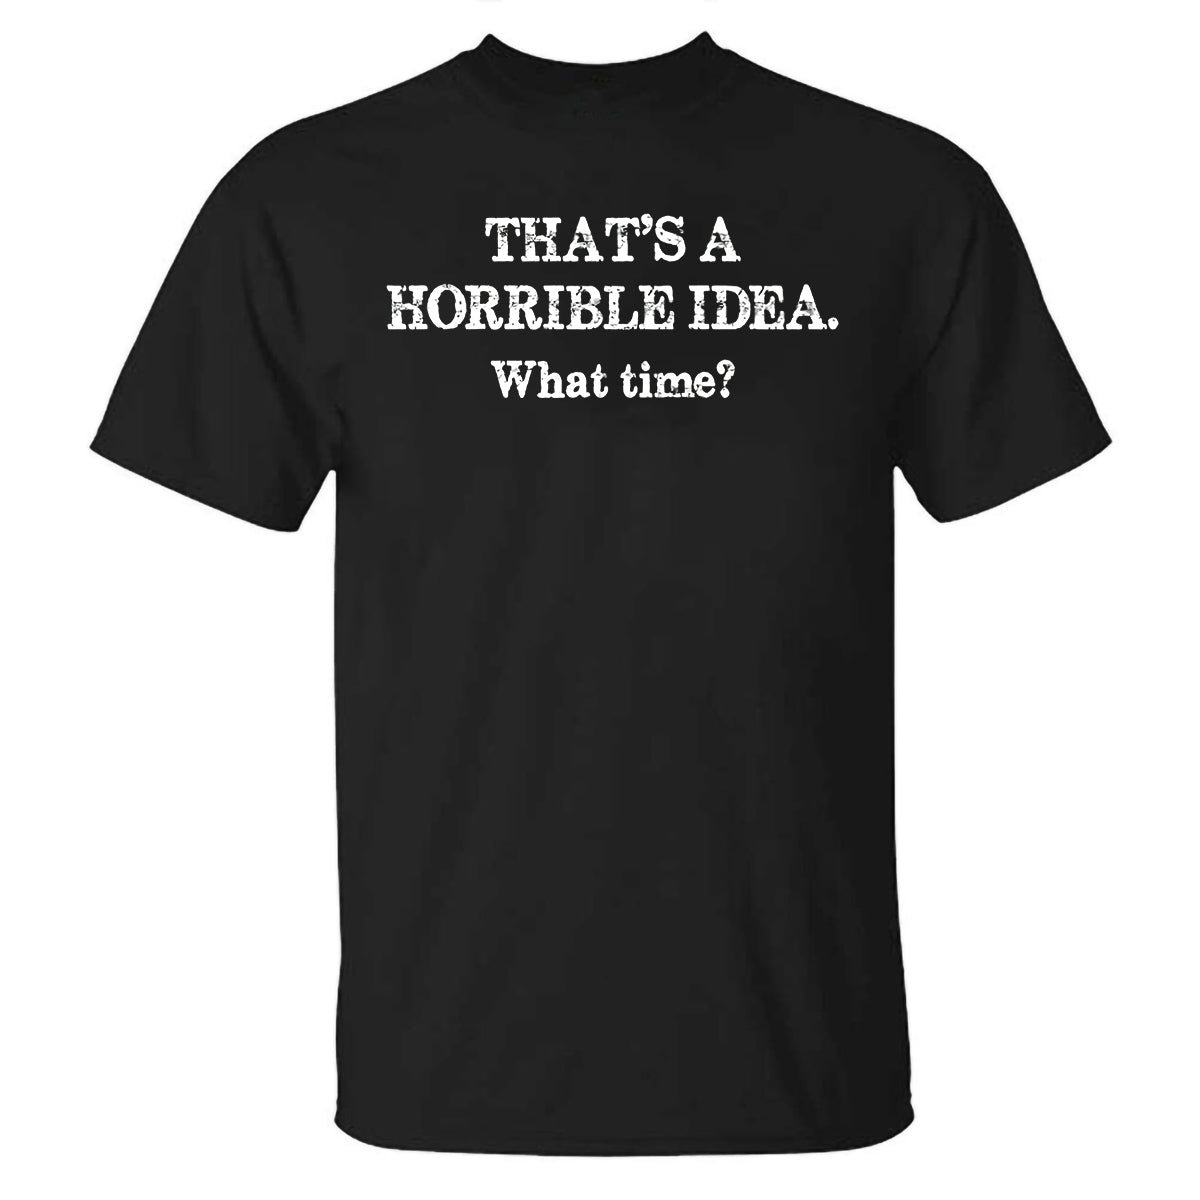 That's A Horrible Idea. What Time? Printed T-shirt